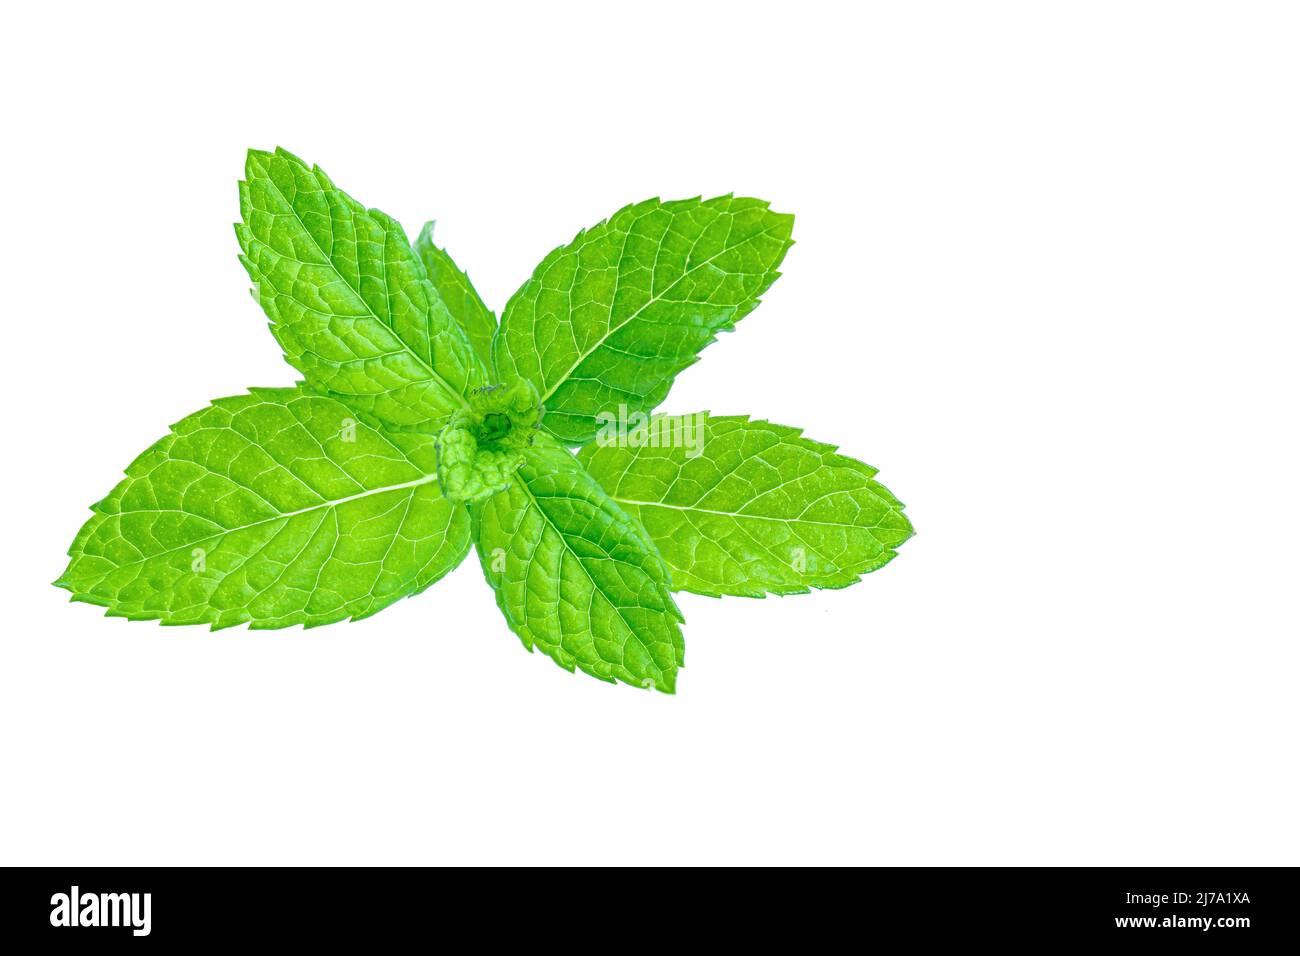 Spearmint, also known as garden mint, common or lamb mint and mackerel mint, is a species of mint, Mentha spicata, native to Europe and southern tempe Stock Photo